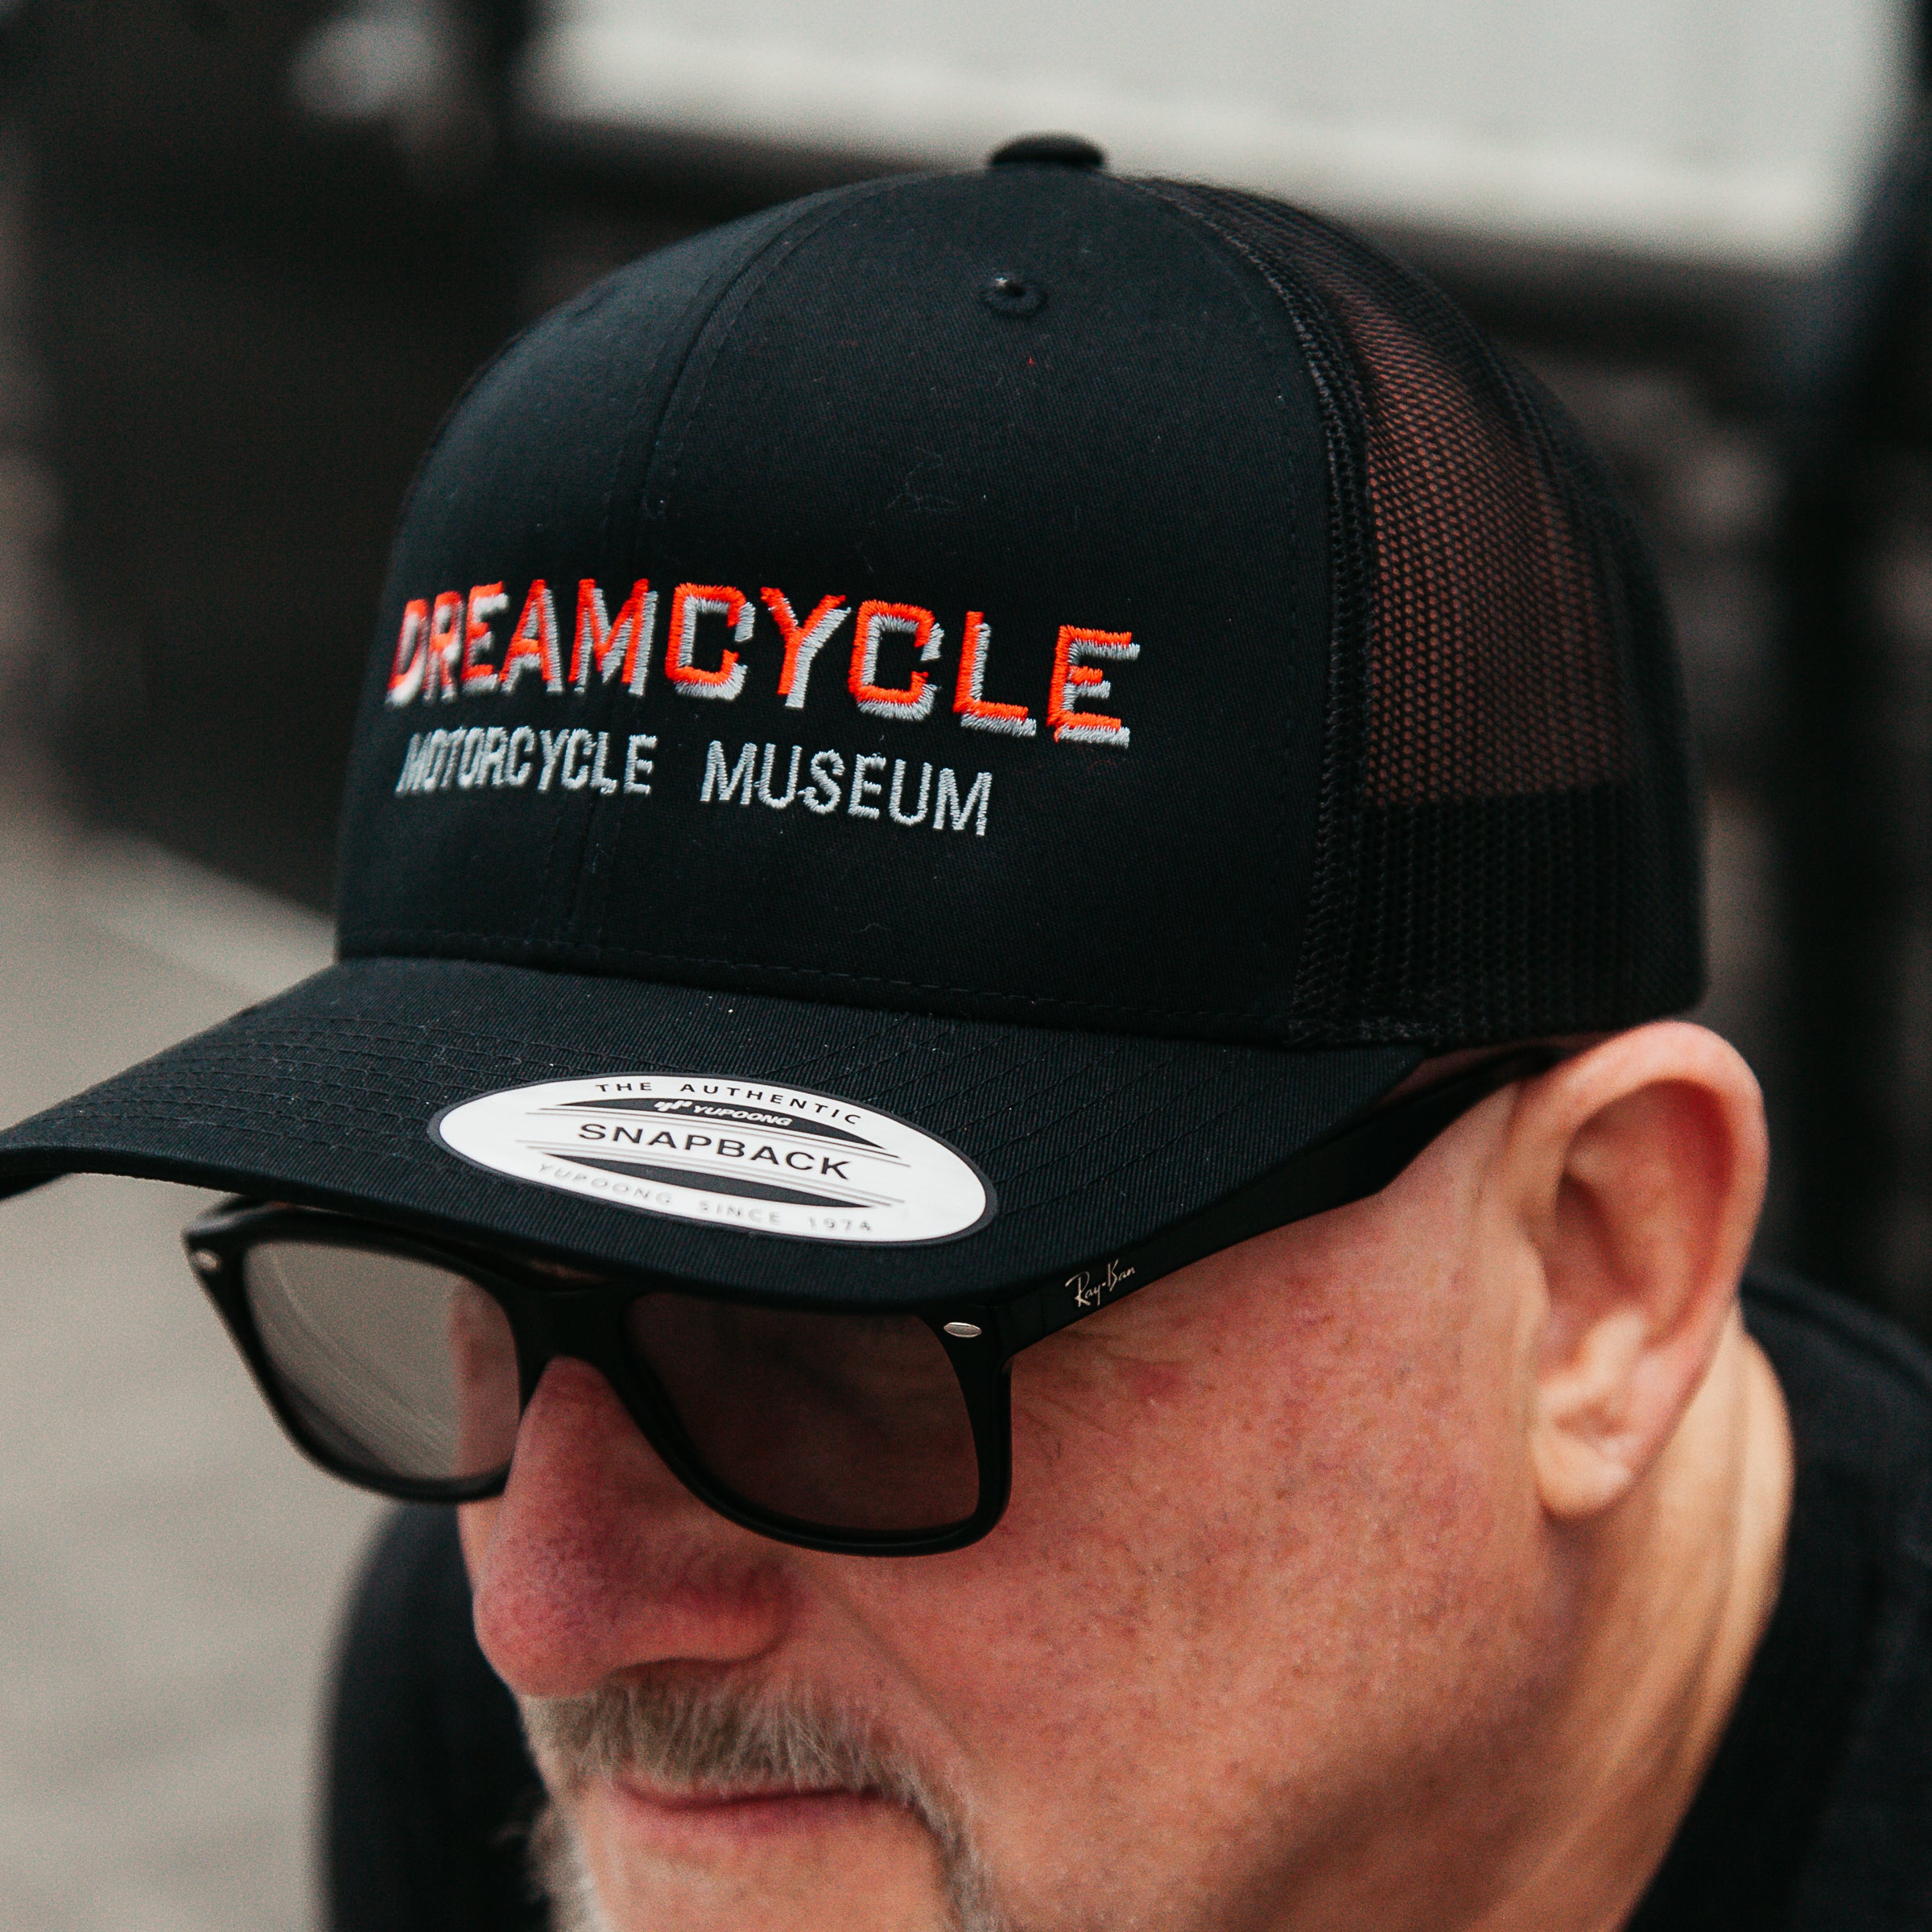 Dreamcycle Motorcycle Museum | Man wearing dreamcycle trucker hat in lifestyle setting.